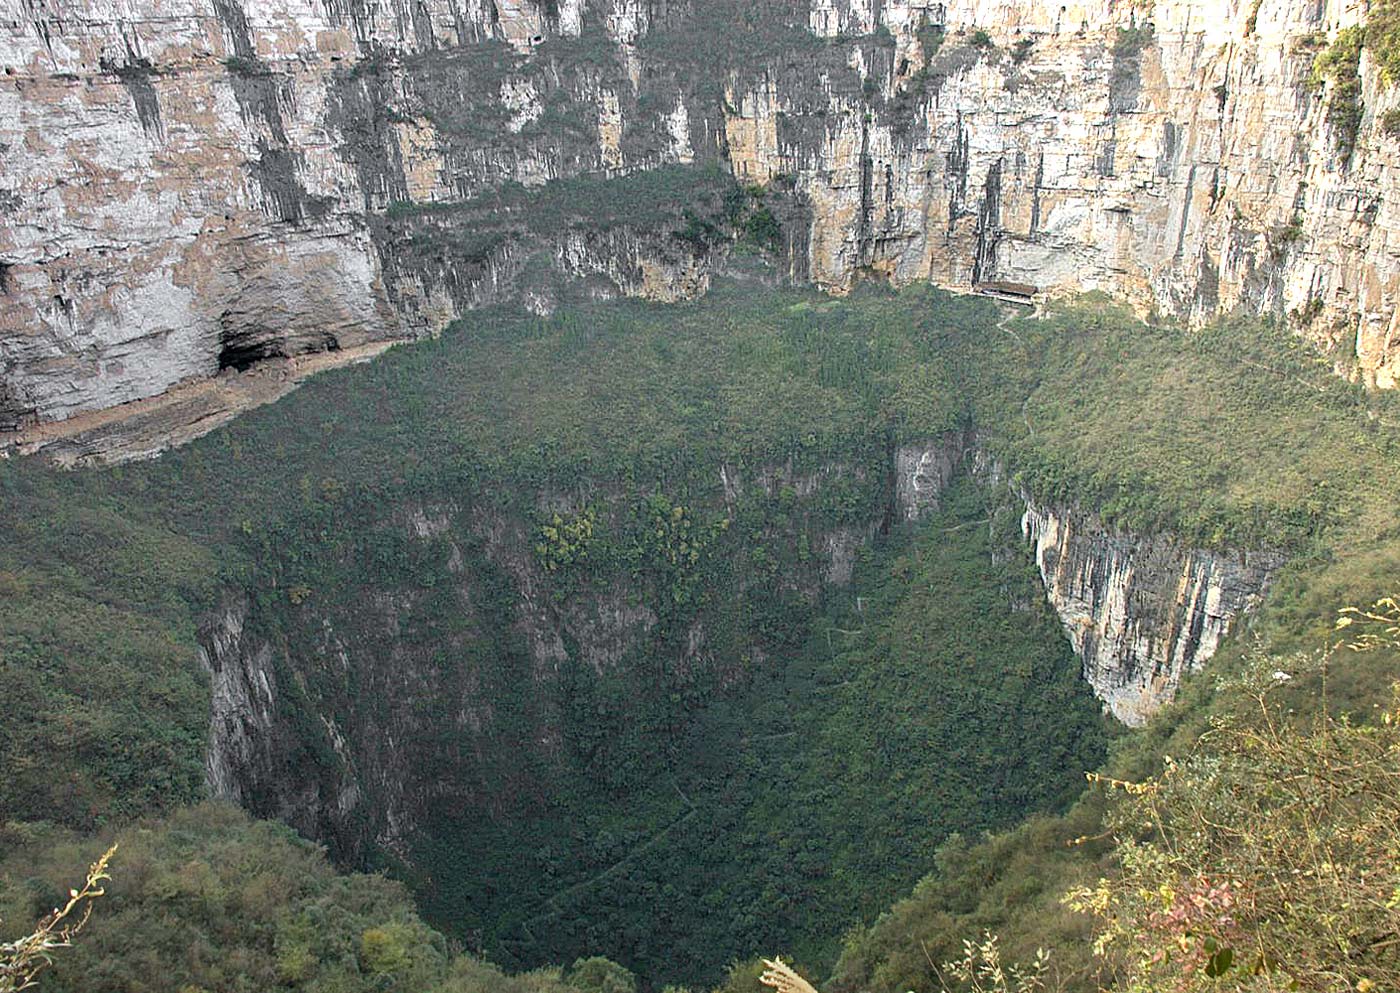 Heavenly pit, world's deepest sinkhole in China